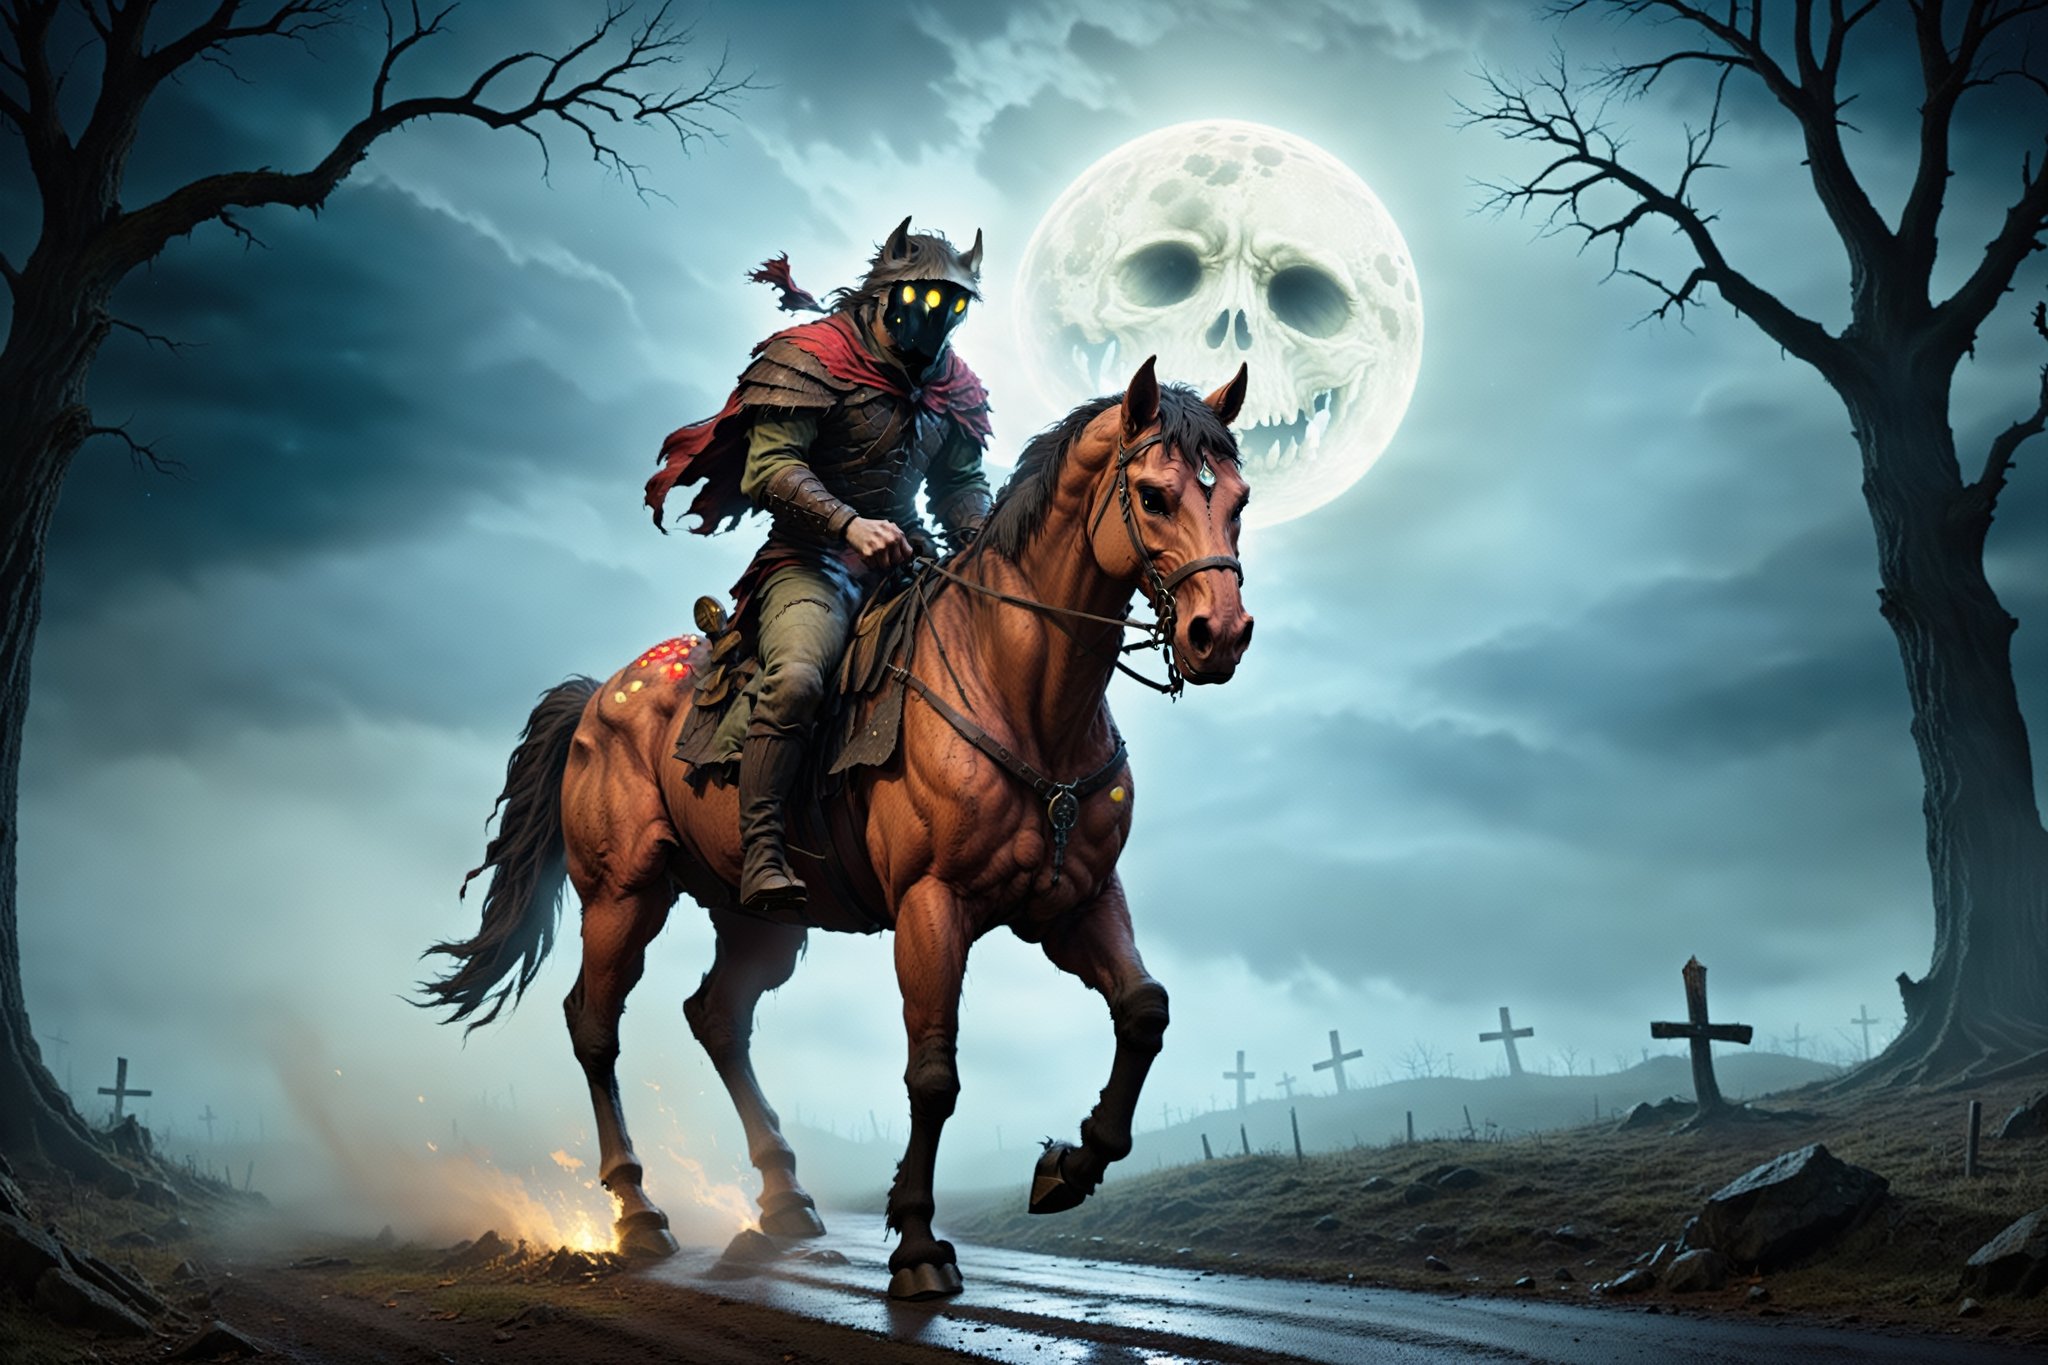 The headless horseman, tears through a moonlit landscape. This 4k ultra-high definition scene should be ultra-detailed and perfectly illuminated, ensuring every detail contributes to the eerie atmosphere. The story unfolds on a desolate road, the roar of a phantom engine fills the air. As the vehicle draws closer, the night is pierced by the sight of the headless horseman, guiding the infernal machine with spectral precision. His decapitated visage illuminated by the flickering glow of magic mushrooms, set amidst a dark and haunting backdrop. This prompt sets the stage for a suspenseful and thrilling story featuring the headless horseman and a mysterious vehicle, driven with an aura of horror.